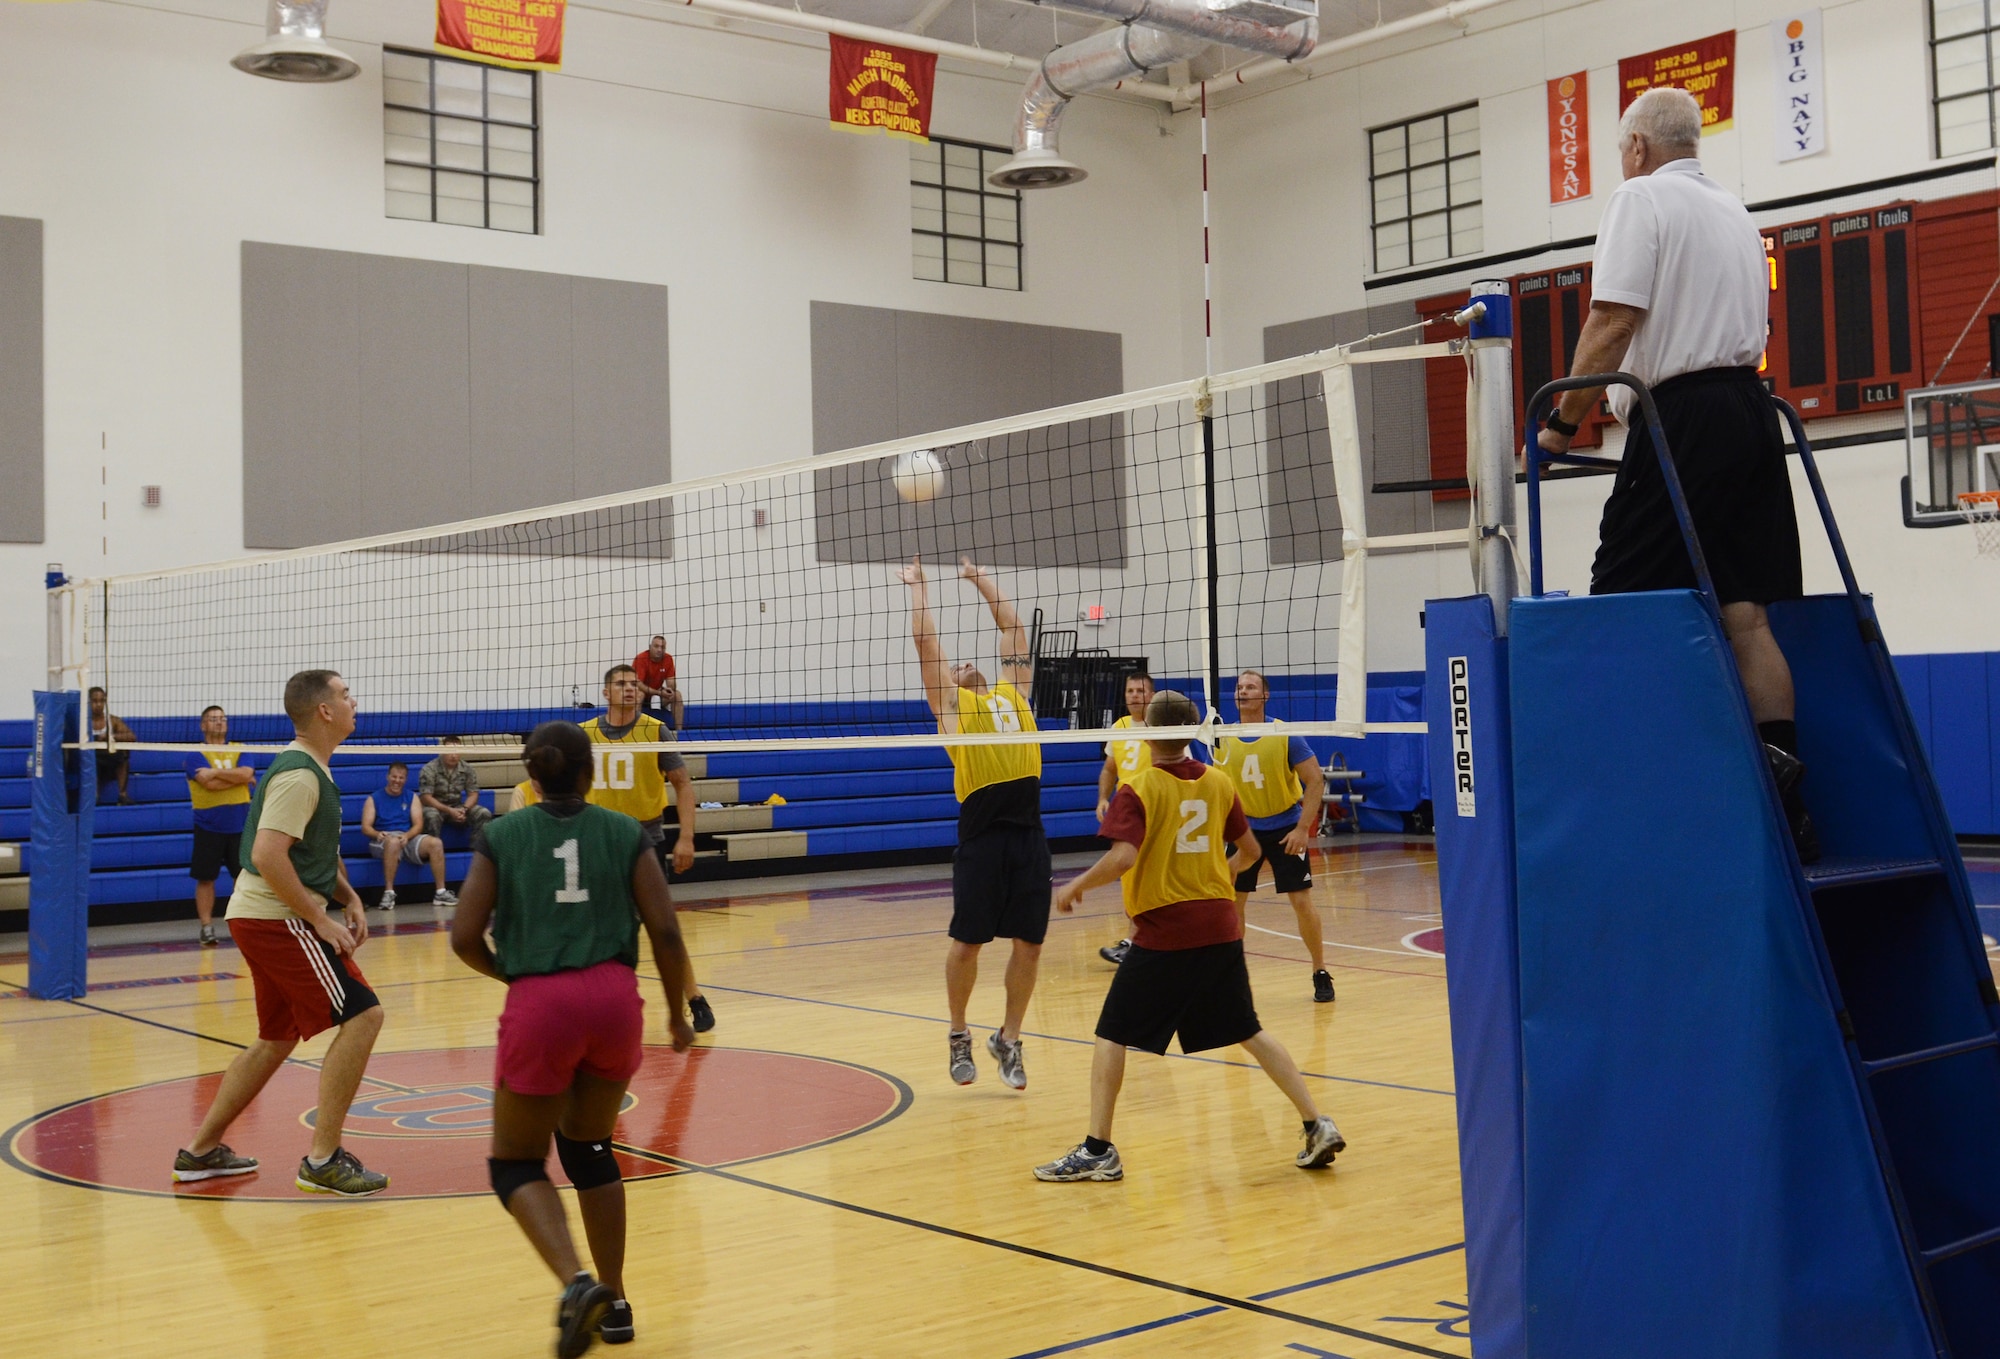 ANDERSEN AIR FORCE BASE, Guam—Members of the 96th Expeditionary Bomb Squadron and the 36th Expeditionary Aircraft Maintenance Squadron in an intramural volleyball game here, Nov. 15. Playoffs for intramural volleyball will begin Jan. 14 and will end Jan. 18. (U.S. Air Force photo by Senior Airman Benjamin Wiseman/Released)